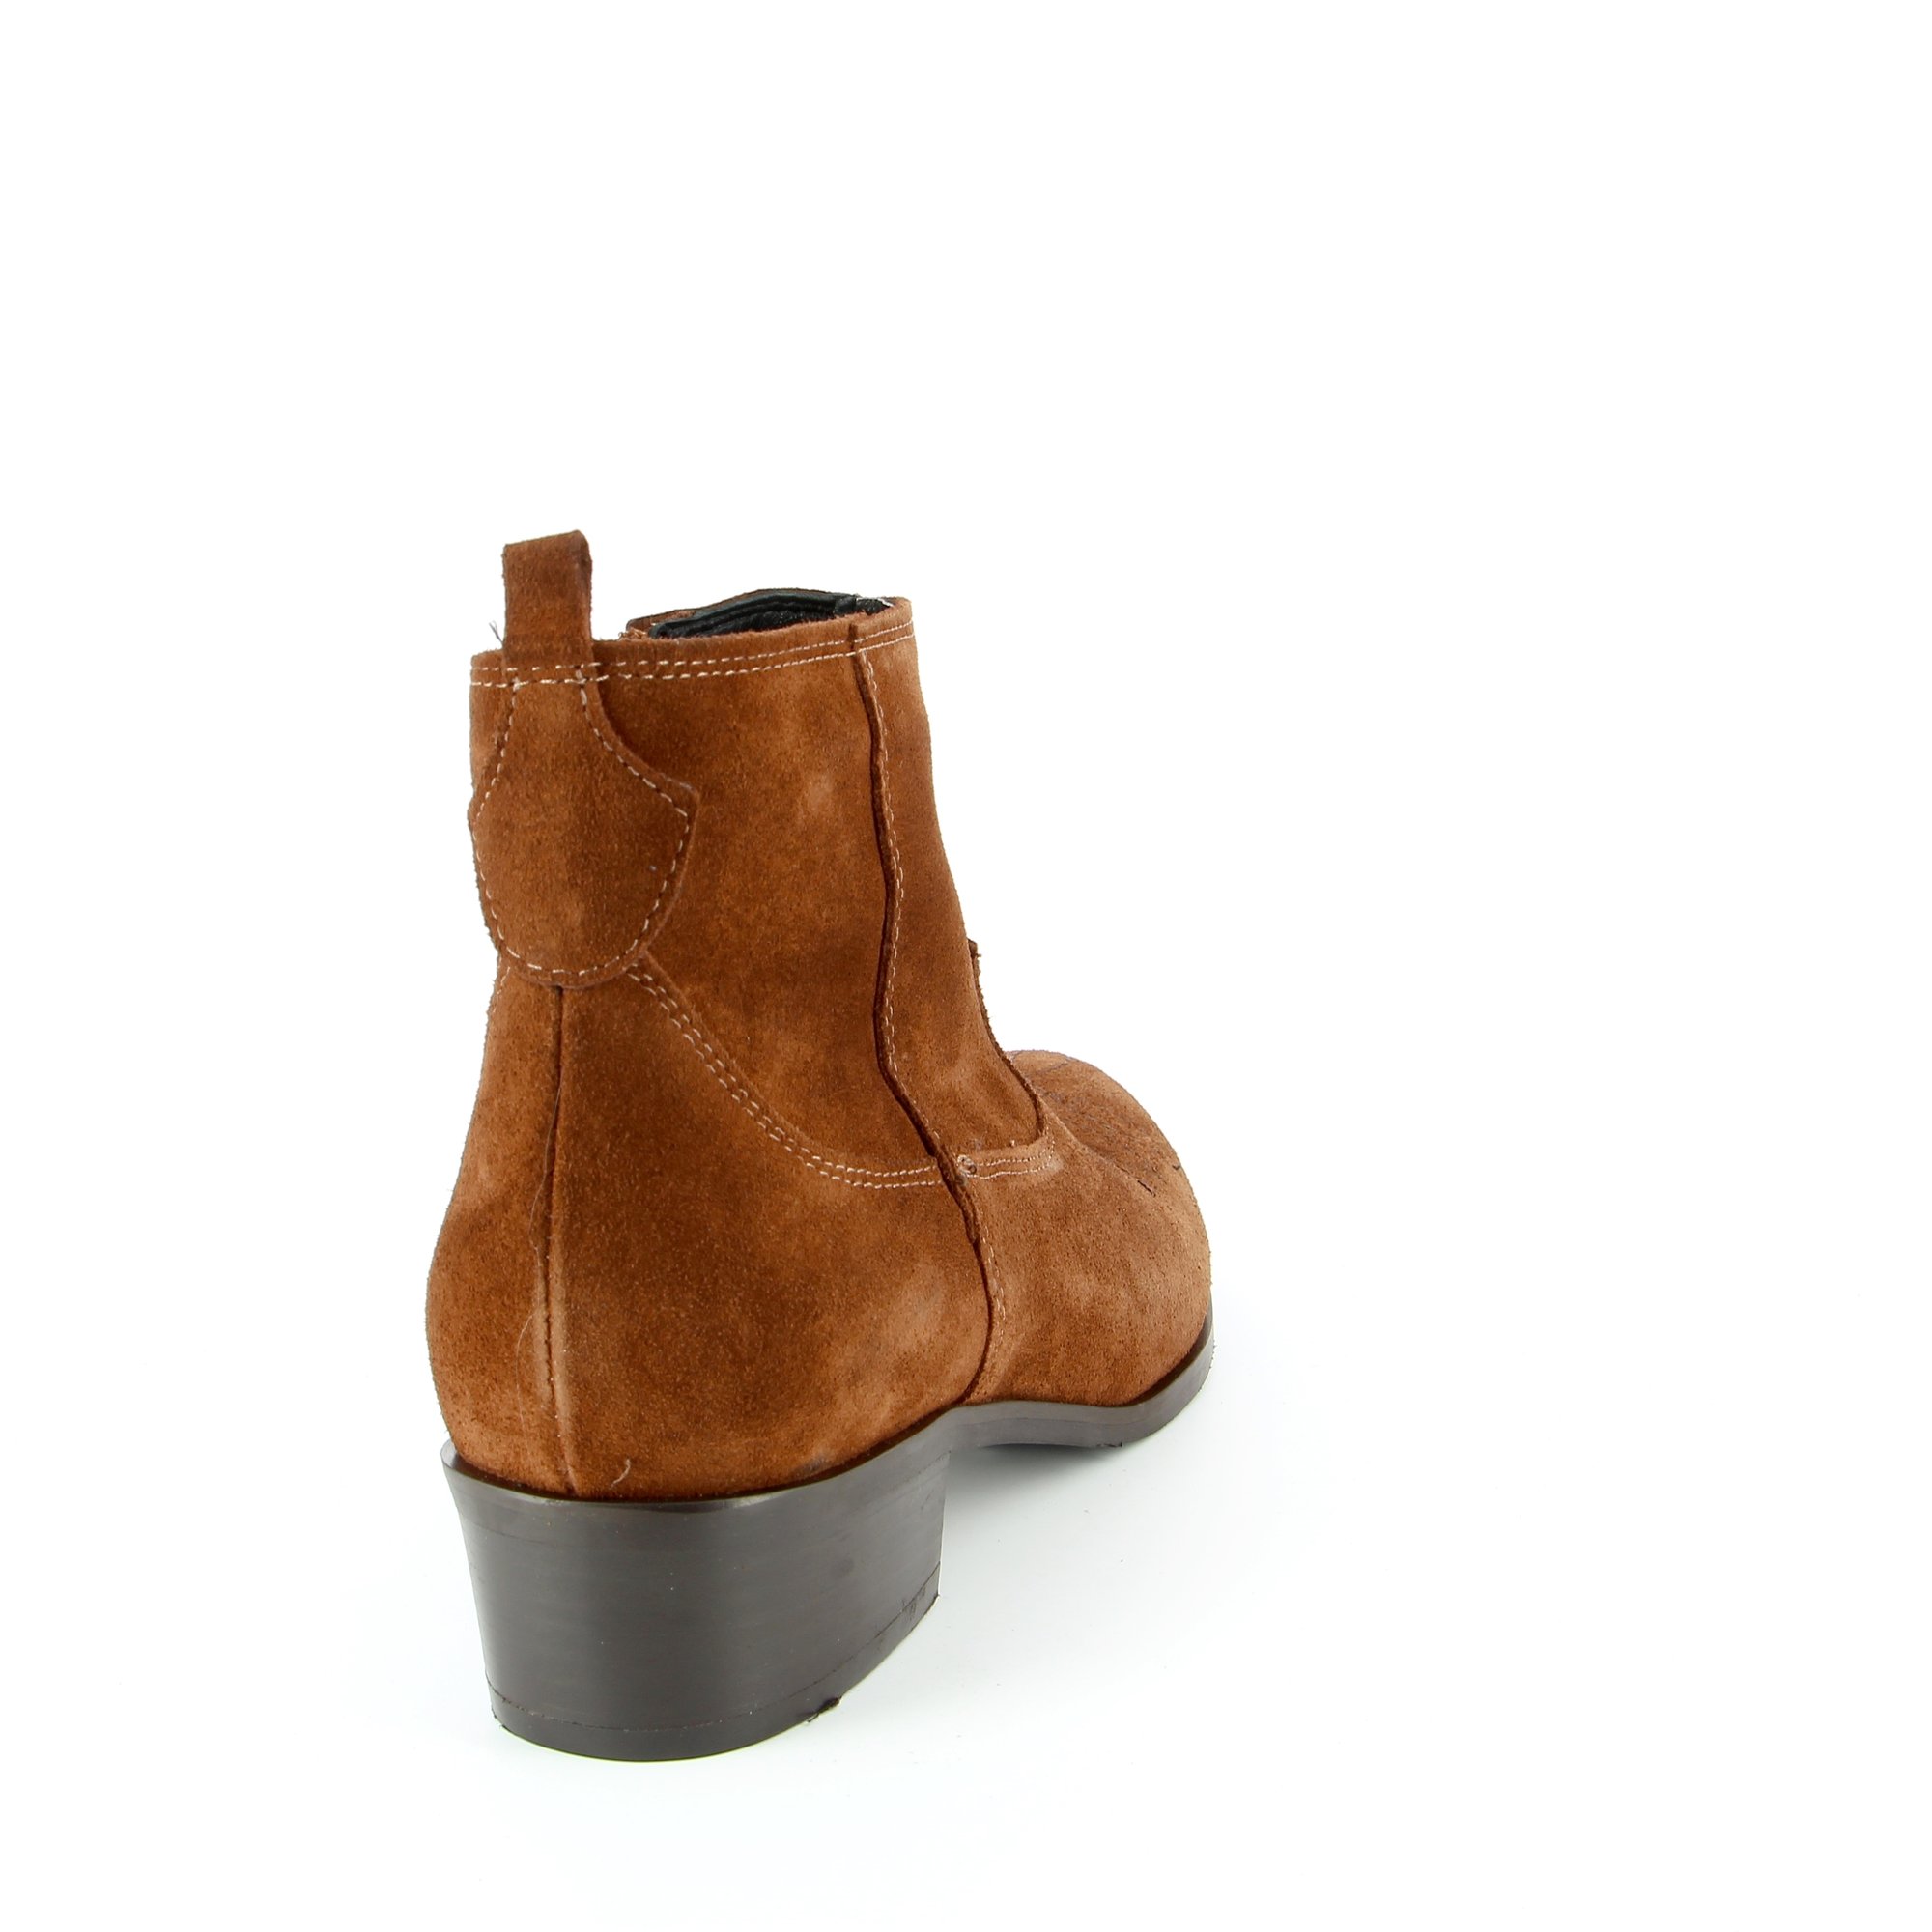 Cypres Boots roest